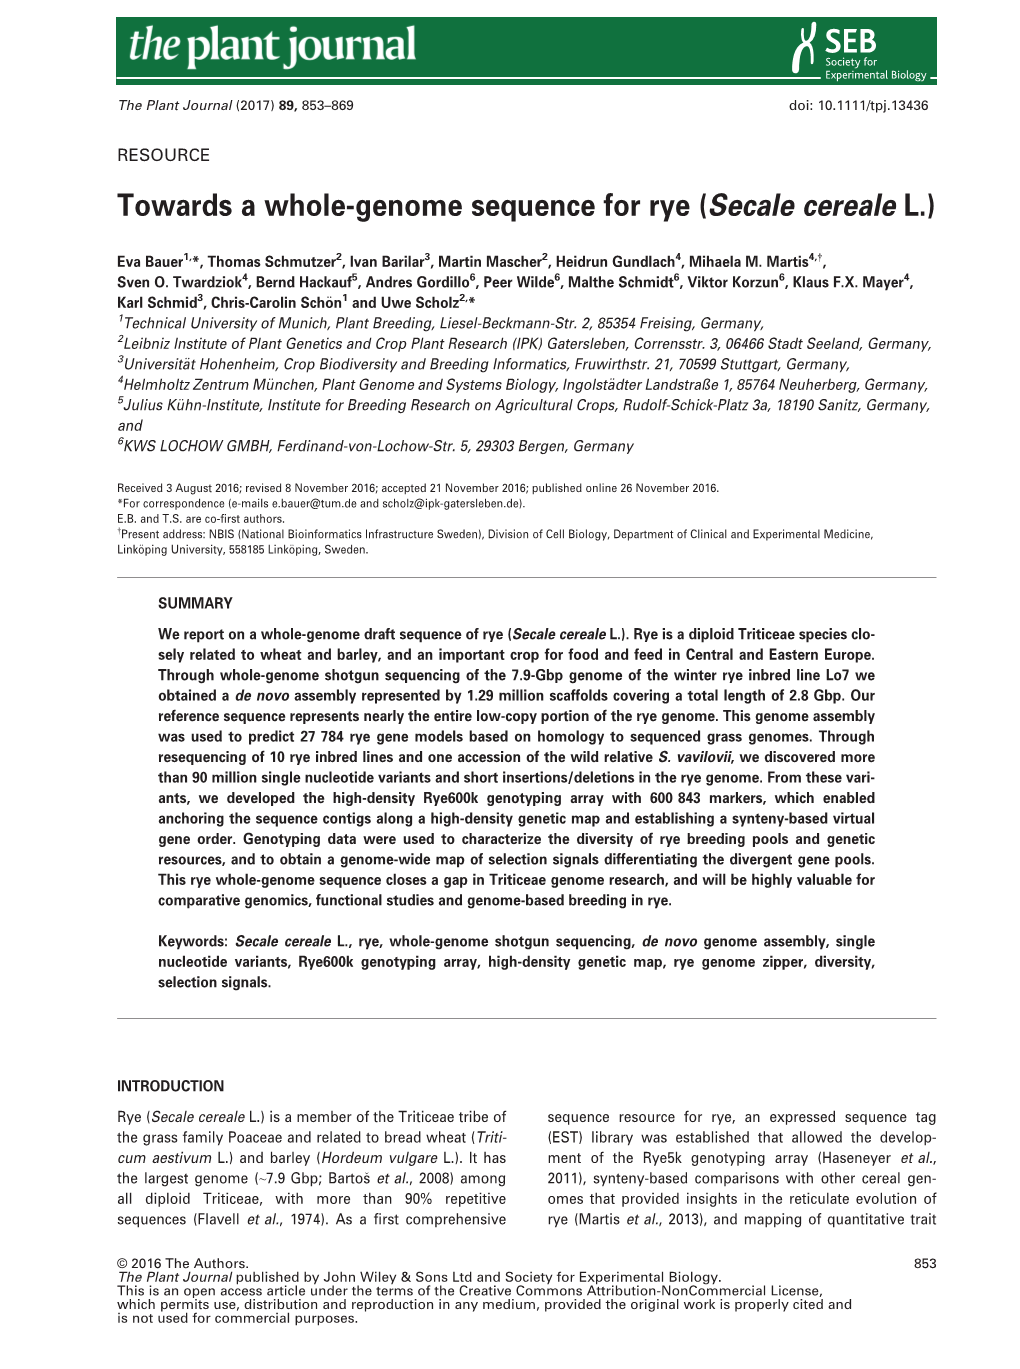 Genome Sequence for Rye (Secale Cereale L.)